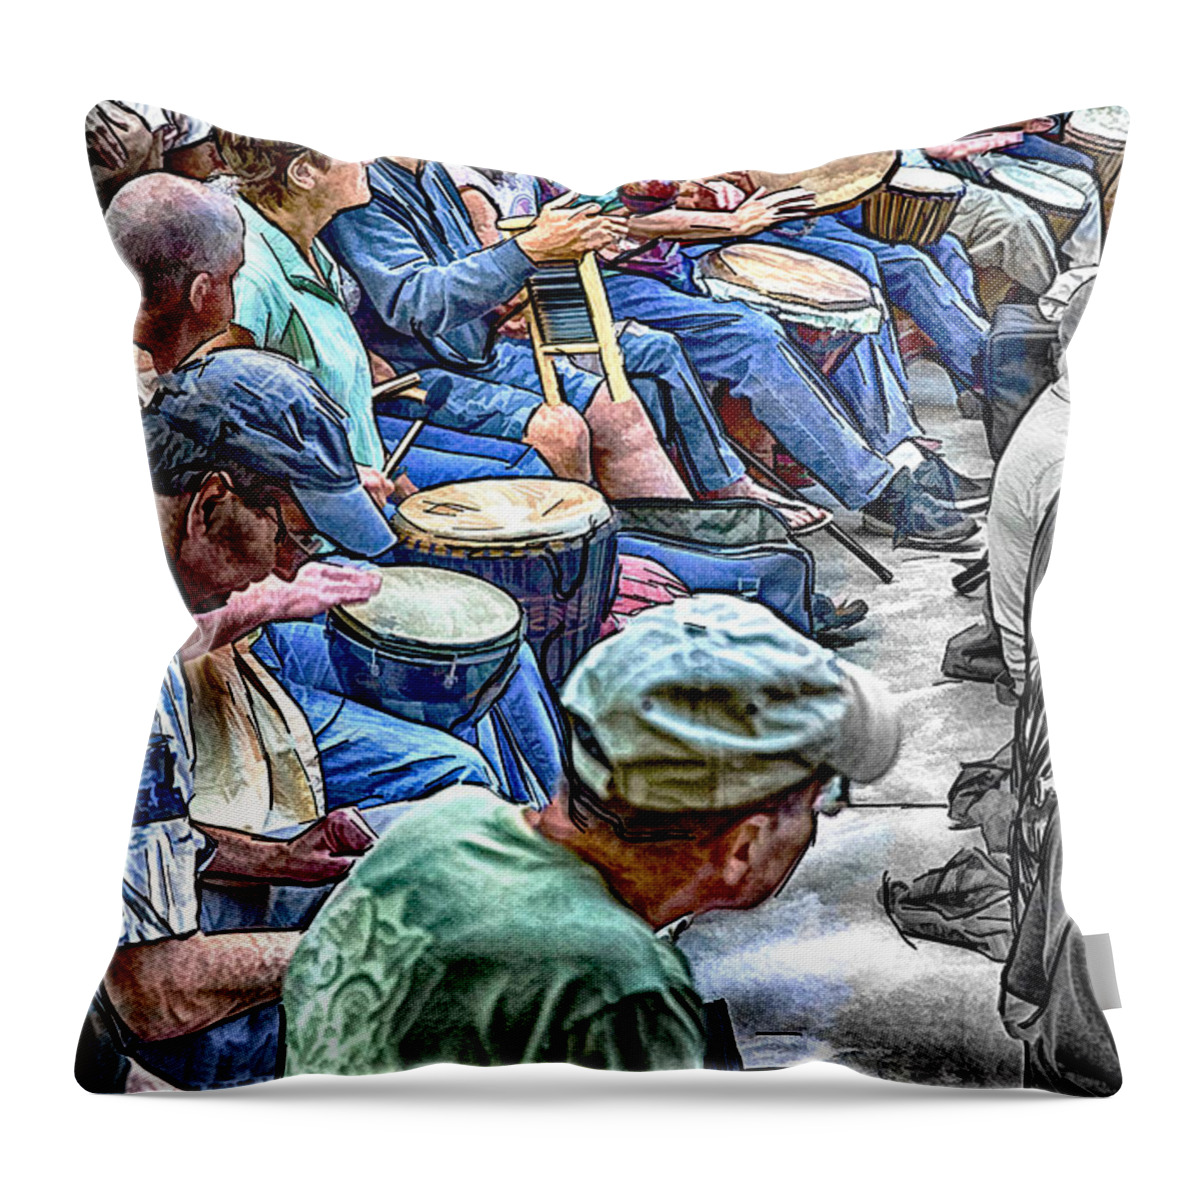 Drum Circle Throw Pillow featuring the mixed media Nitty Gritty Drum Circle by John Haldane